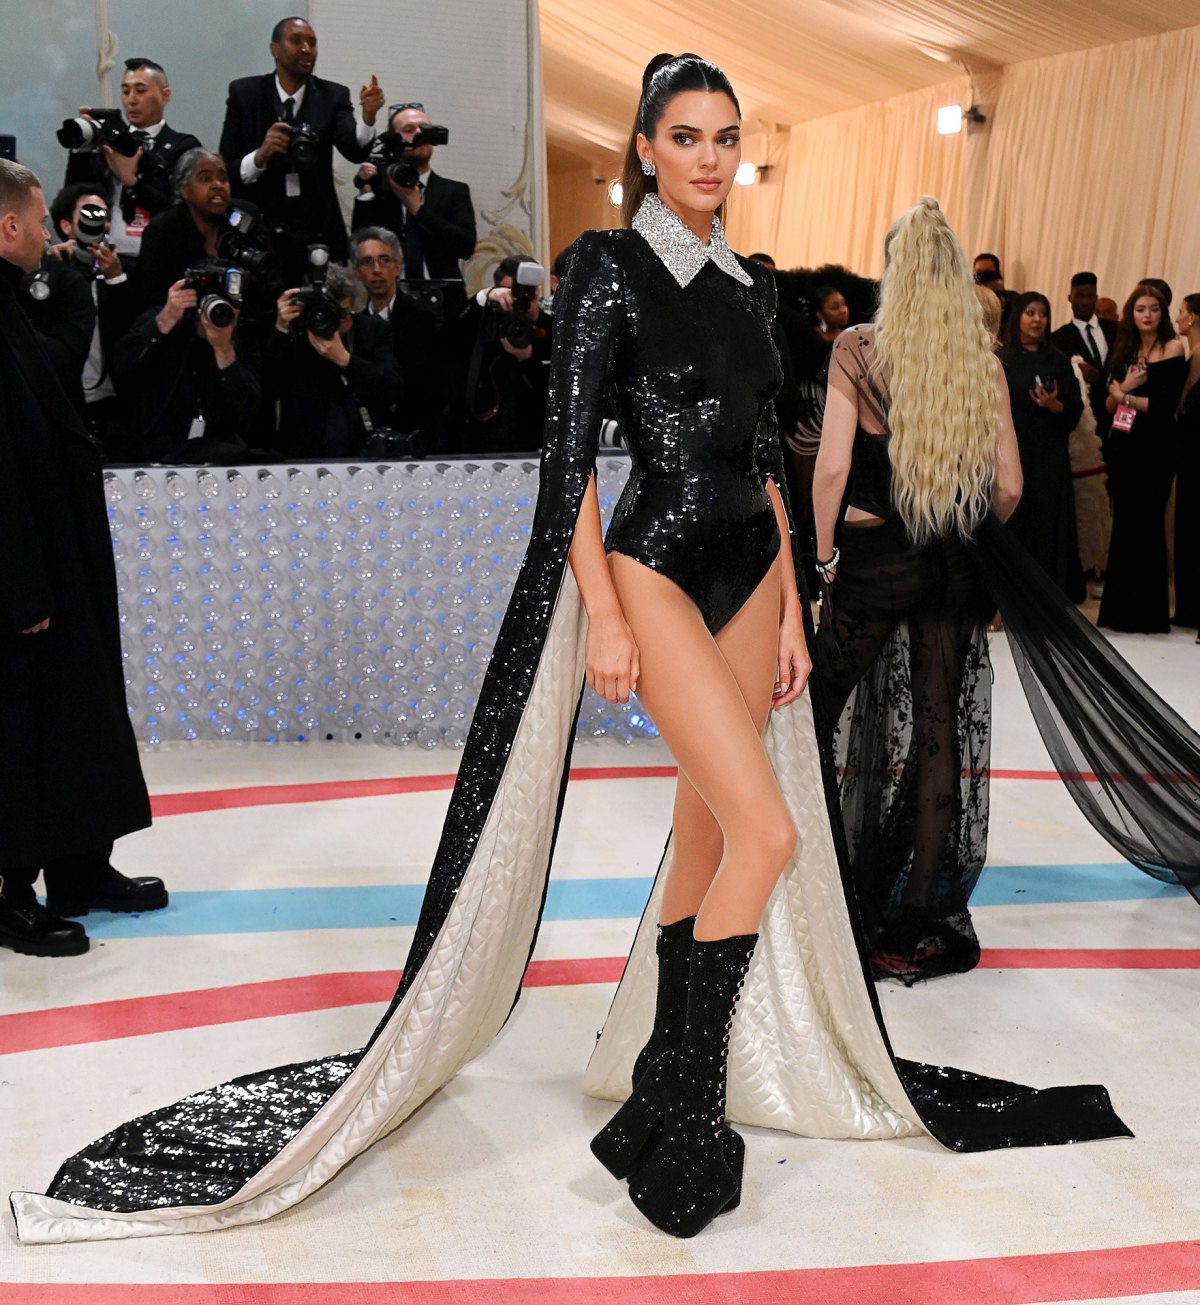 Met Gala 2014: An Exclusive Look Inside the Party of the Year